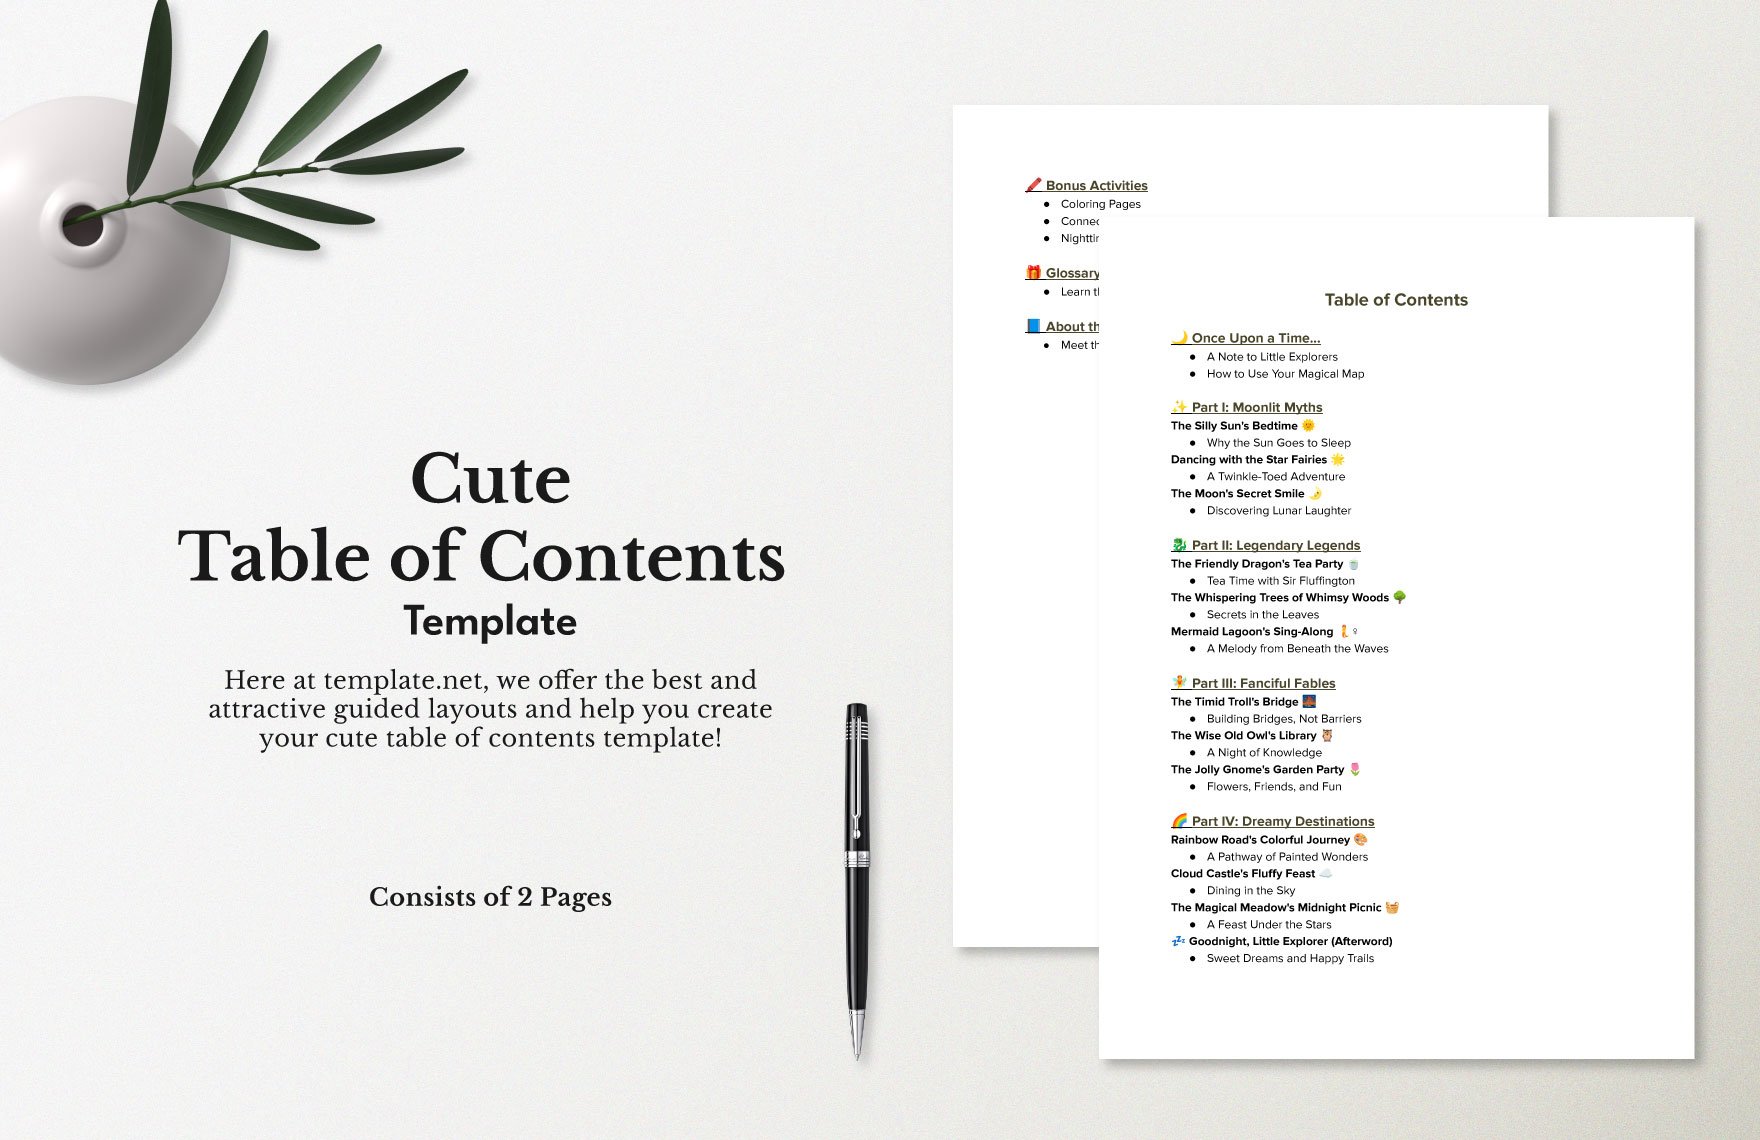 Cute Table of Contents Template